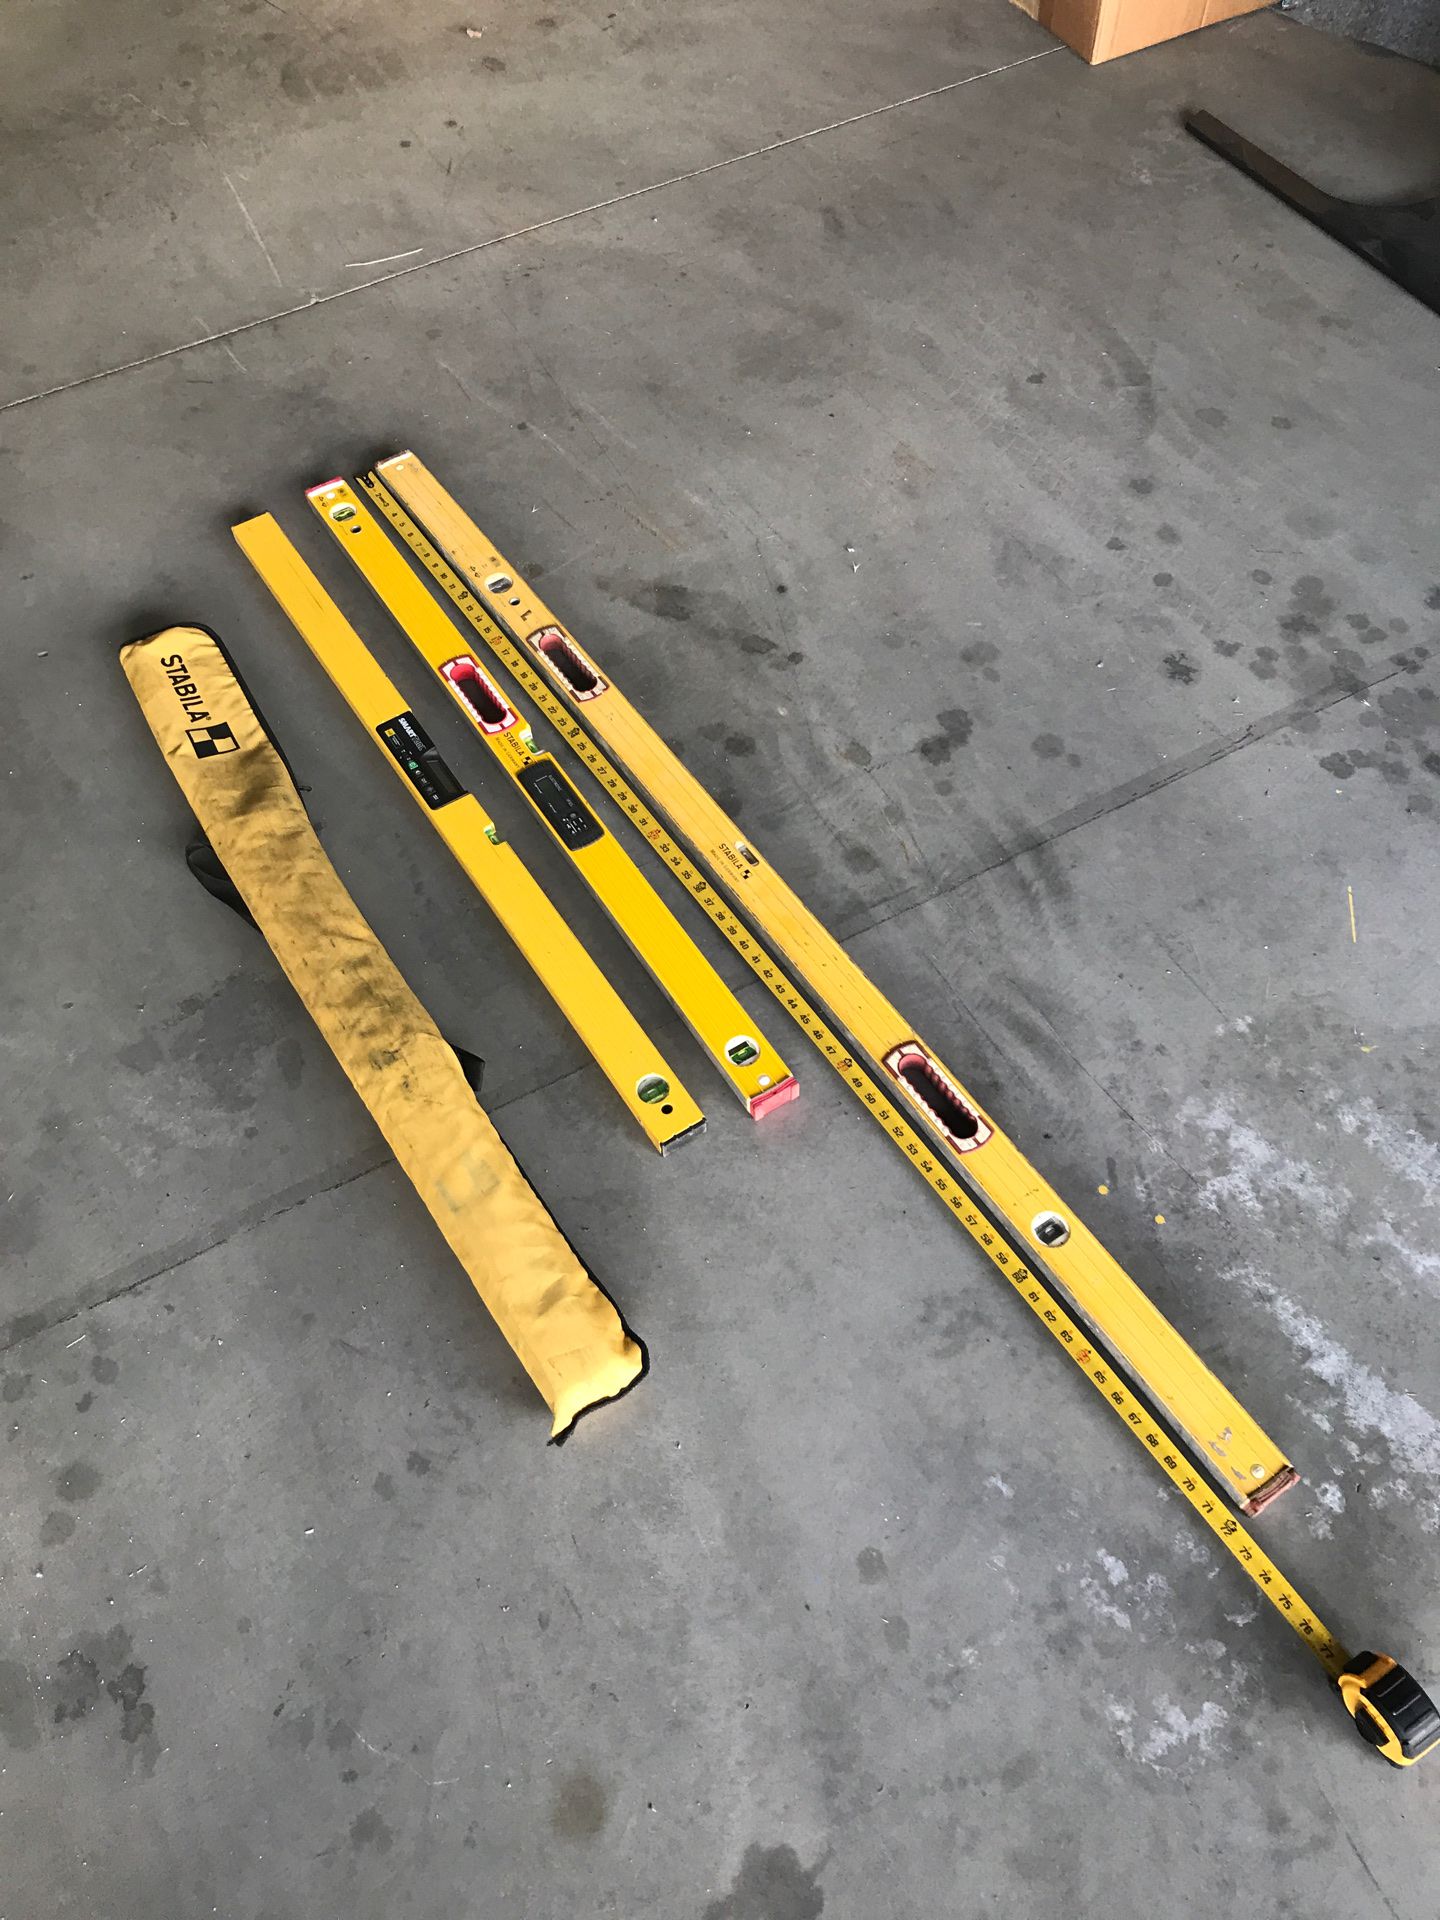 Stabila 6 foot and 4 foot level